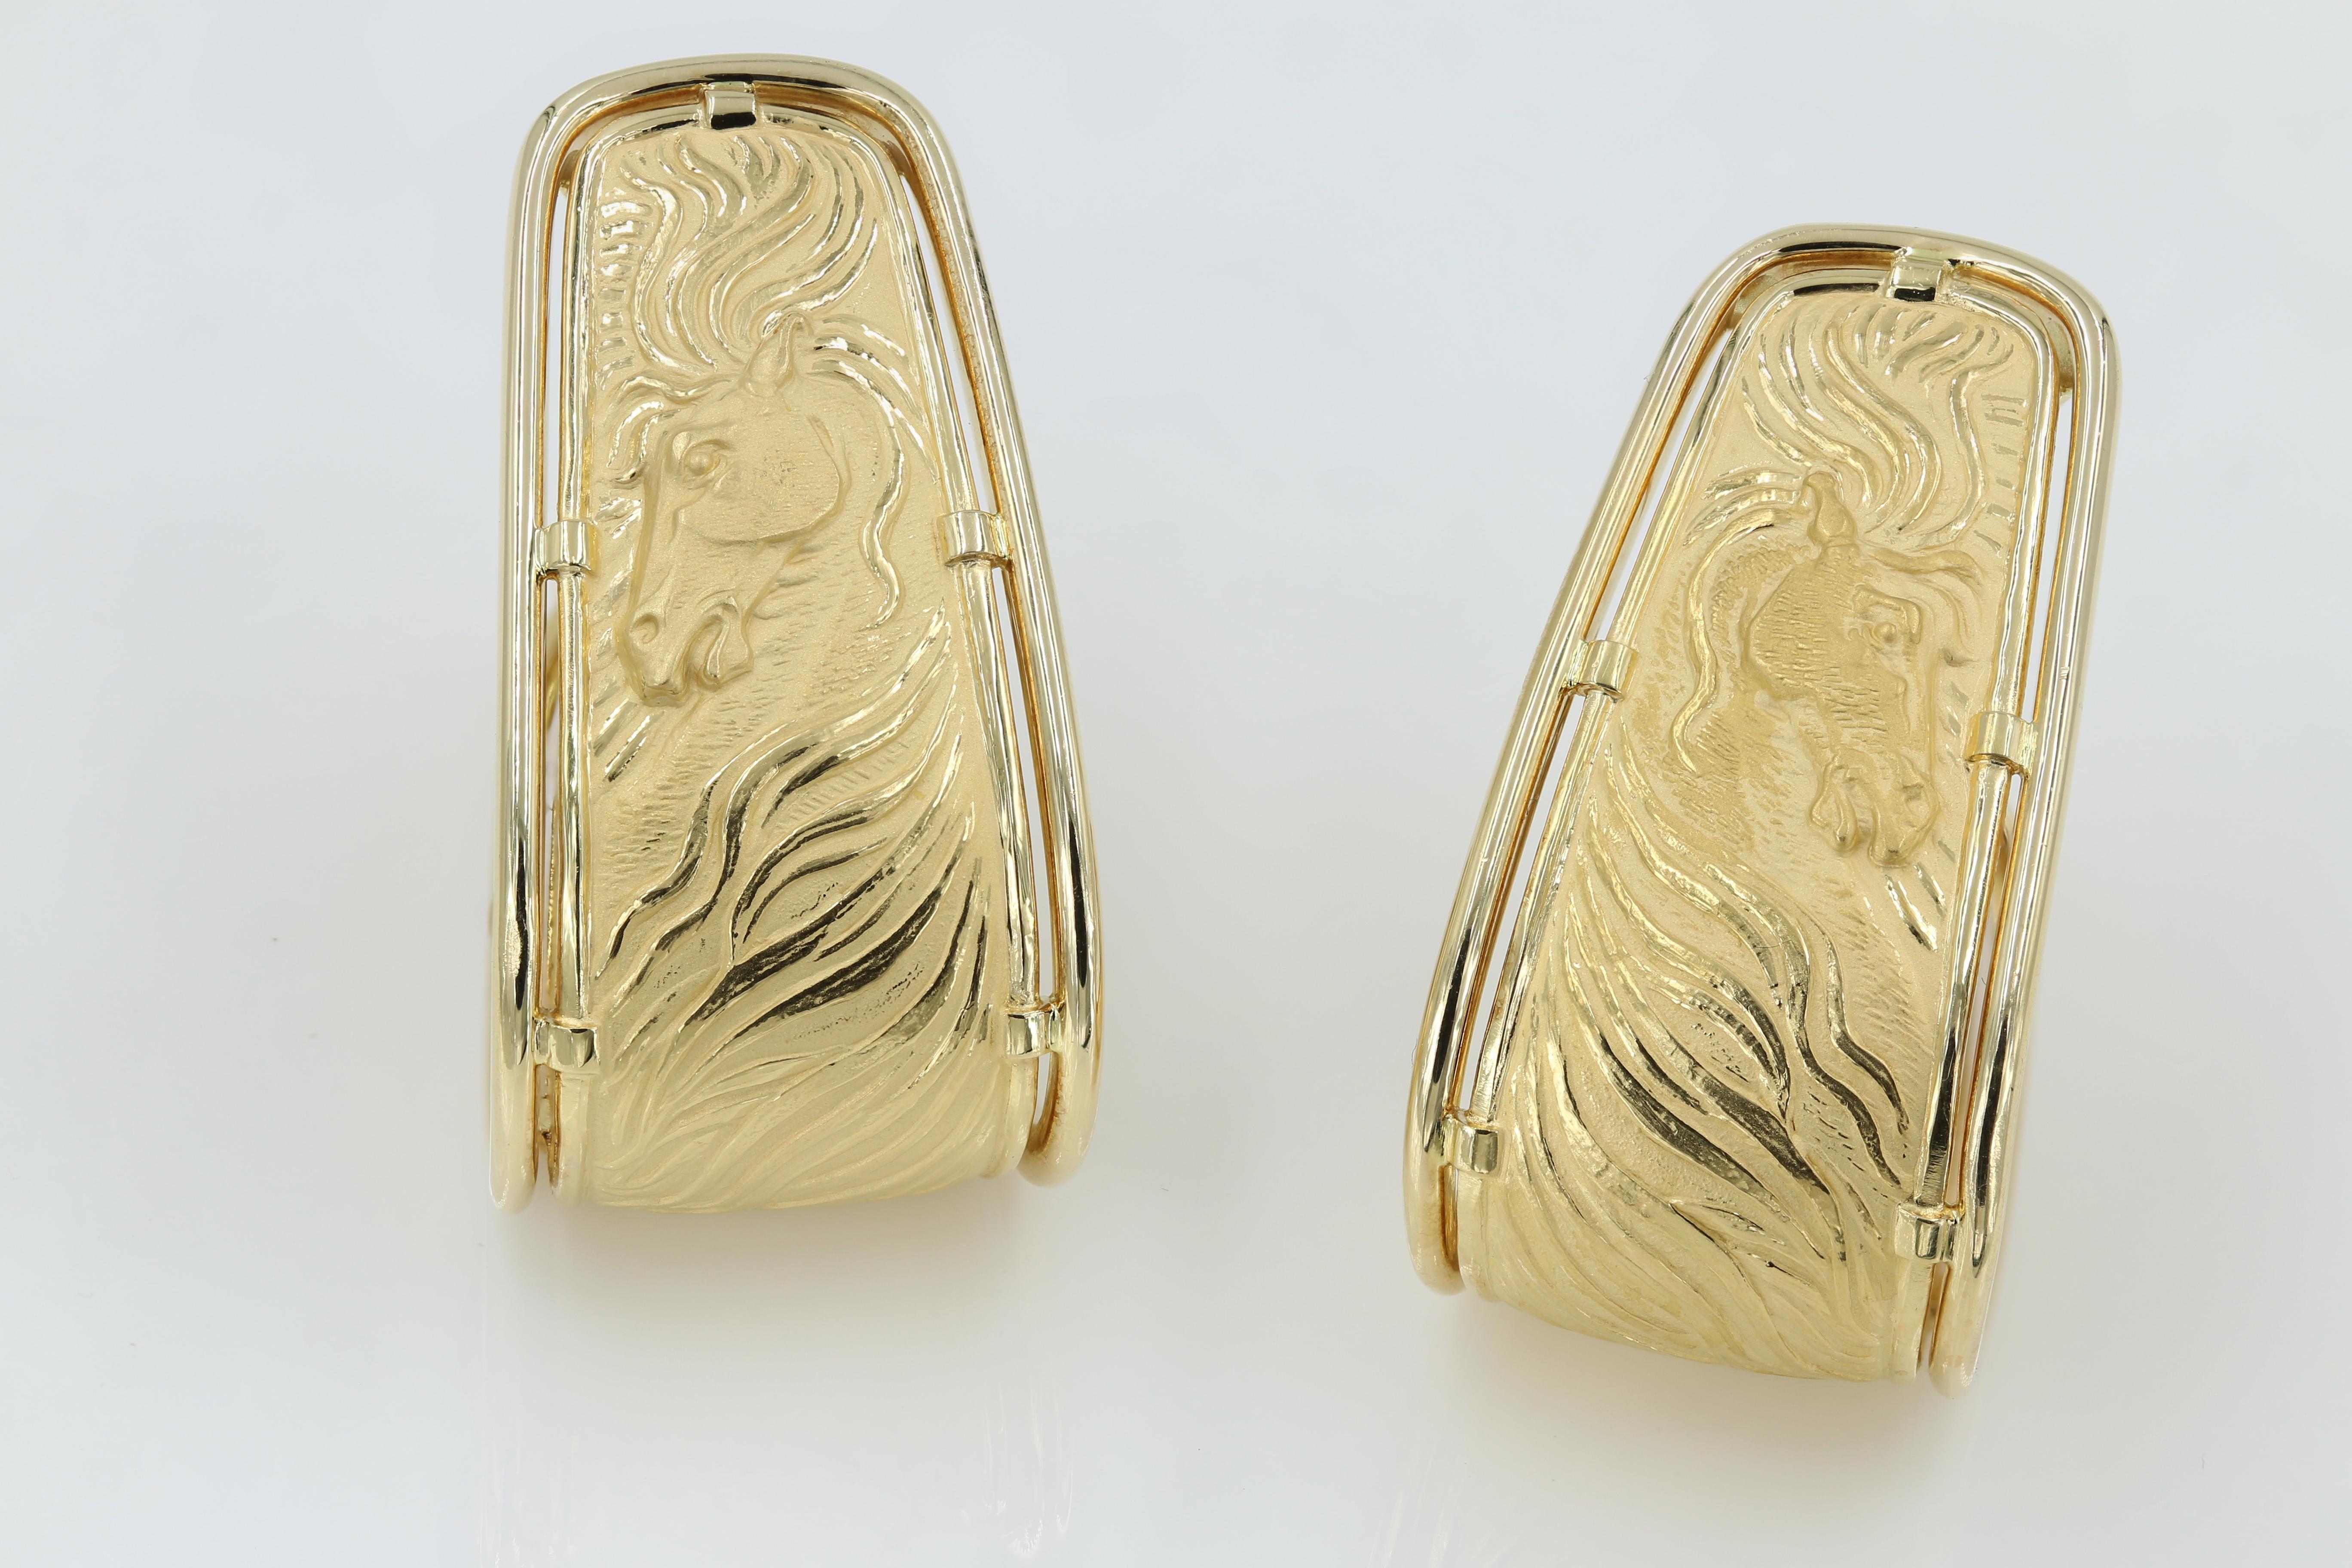 Carrera y Carrera Earrings in 18kt. Yellow Gold earrings with a striking “Horse” theme and is finished with post and omega clip backs. Earrings hang approximately 1.75 inches in length. CyC serial stamped and numbered. Earrings are pre-owned circa